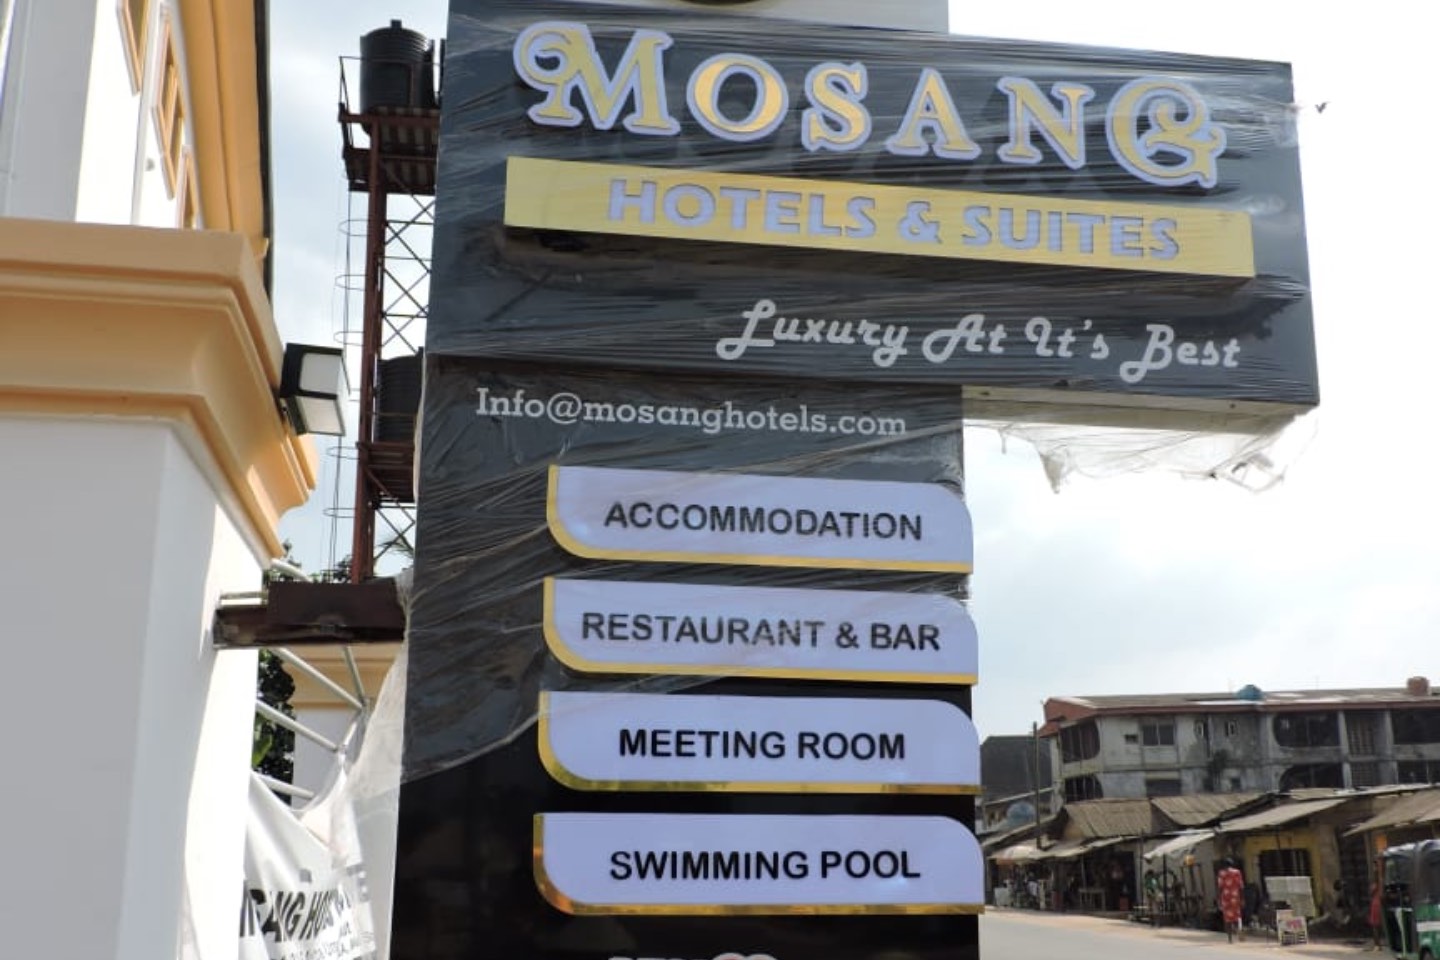 Mosang Hotels and Suites